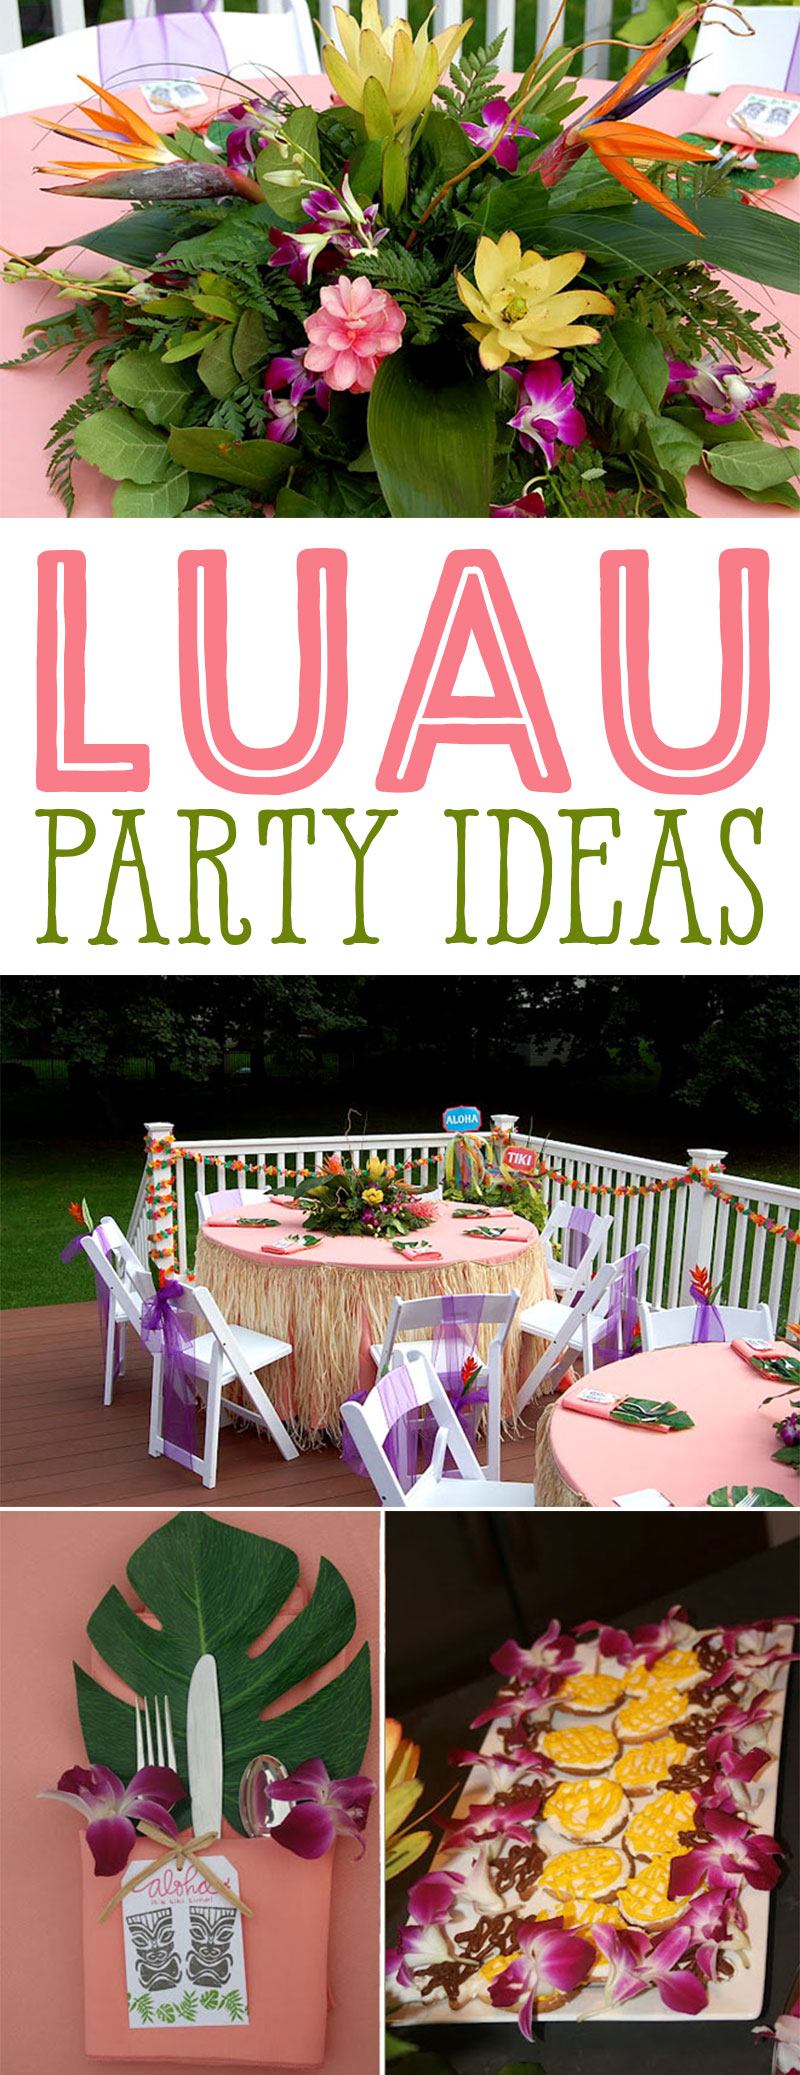 Luau Birthday Party Ideas on Love The Day